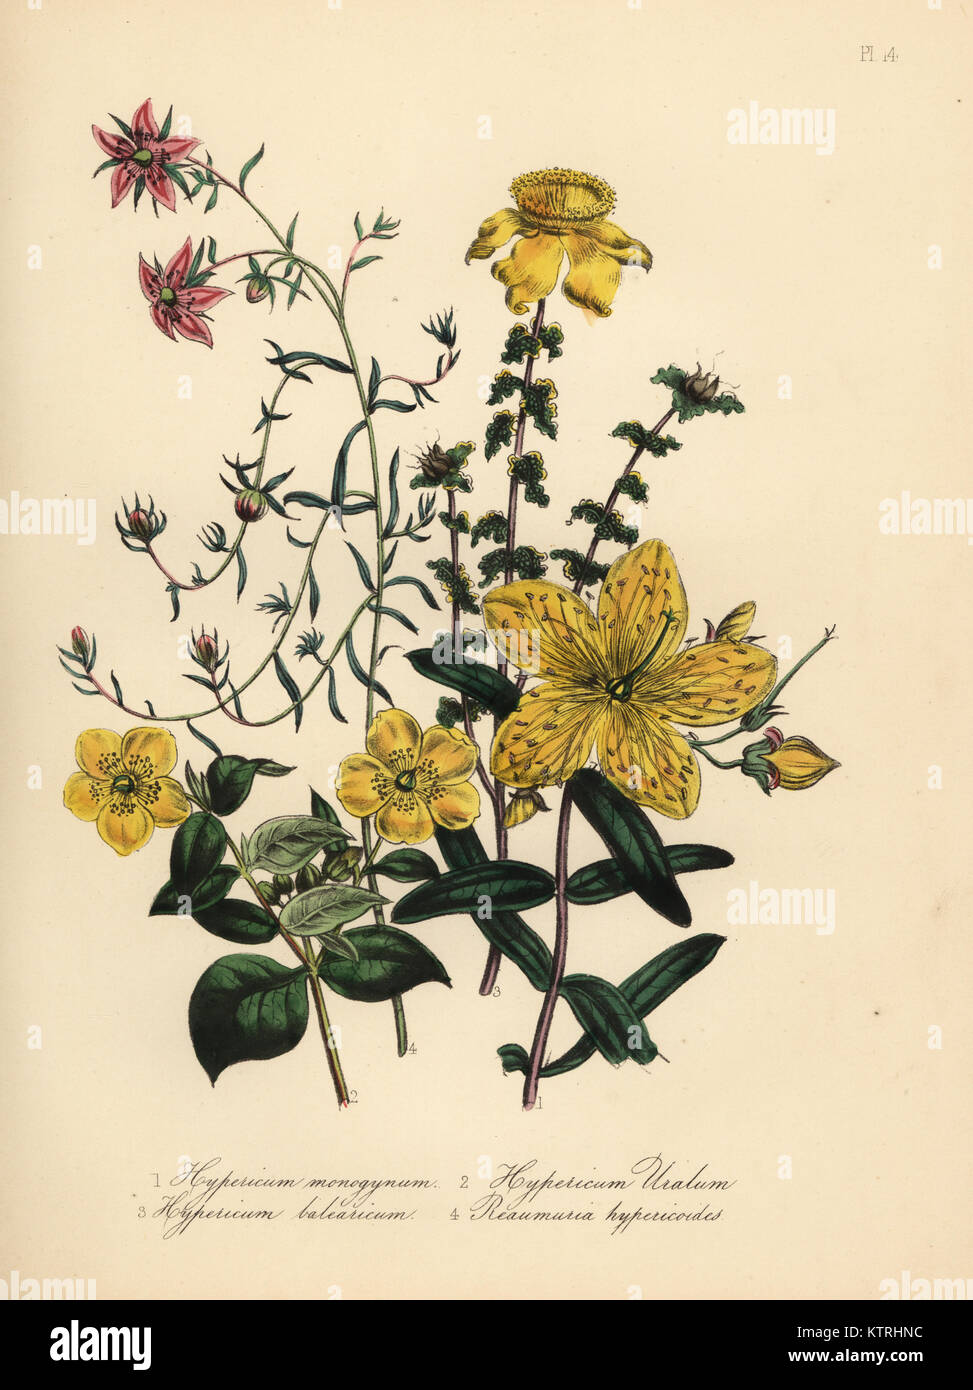 Chinese St. John's wort, Hypericum monogynum, Nepal St. John's wort, Hypericum uralum, Majorca St. John's wort, Hypericum baleericum, and Hypericum-like reaumuria, Reaumuria alternifolia Reaumuria hypericoides. Handfinished chromolithograph by Noel Humphreys after an illustration by Jane Loudon from Mrs. Jane Loudon's Ladies Flower Garden or Ornamental Greenhouse Plants, William S. Orr, London, 1849. Stock Photo